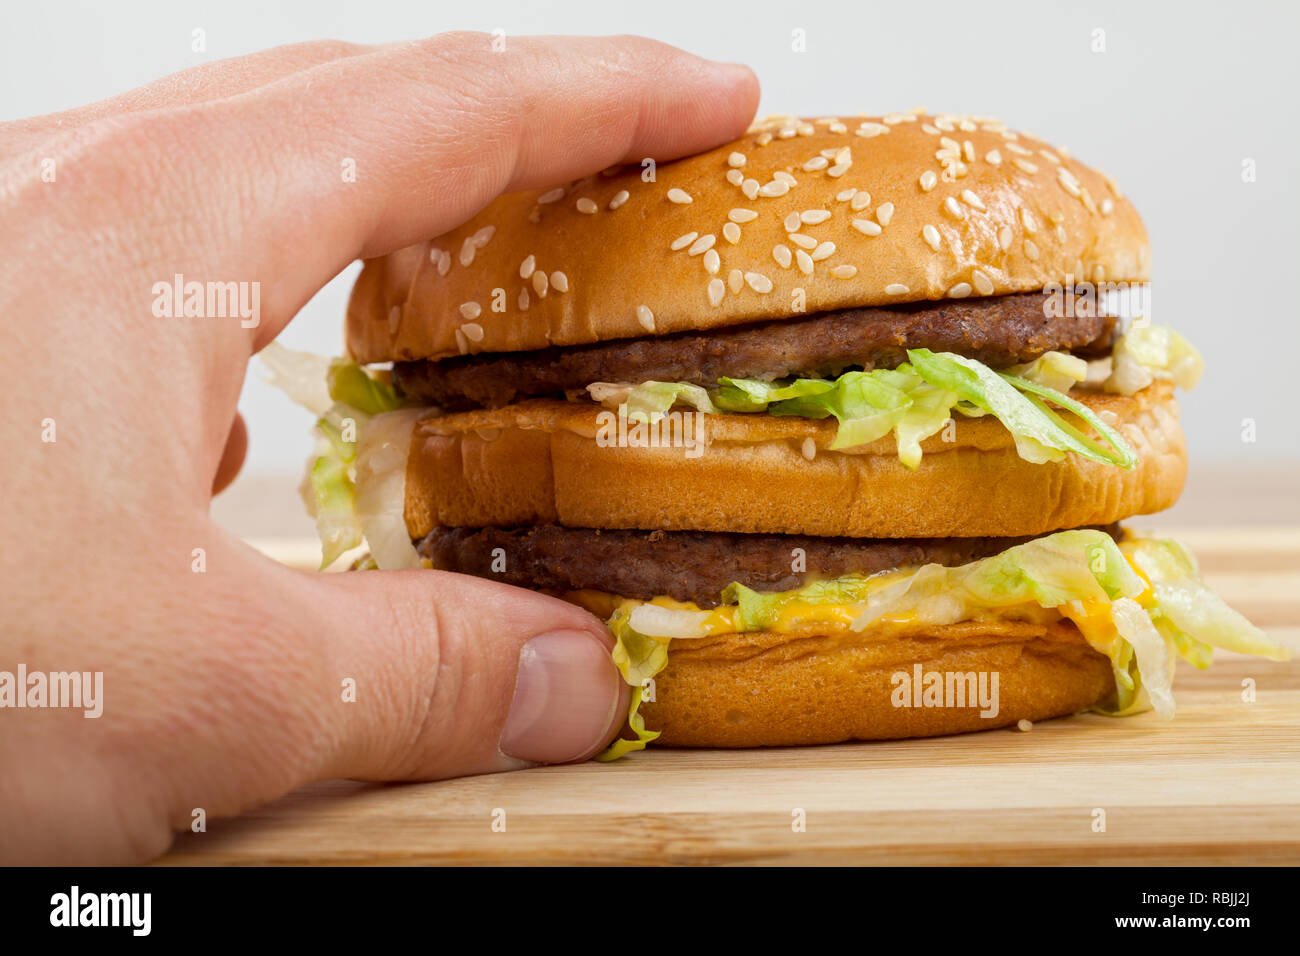 Close up picture of human hand holding a tasty double cheeseburger with beef, cheddar and lettuce Stock Photo